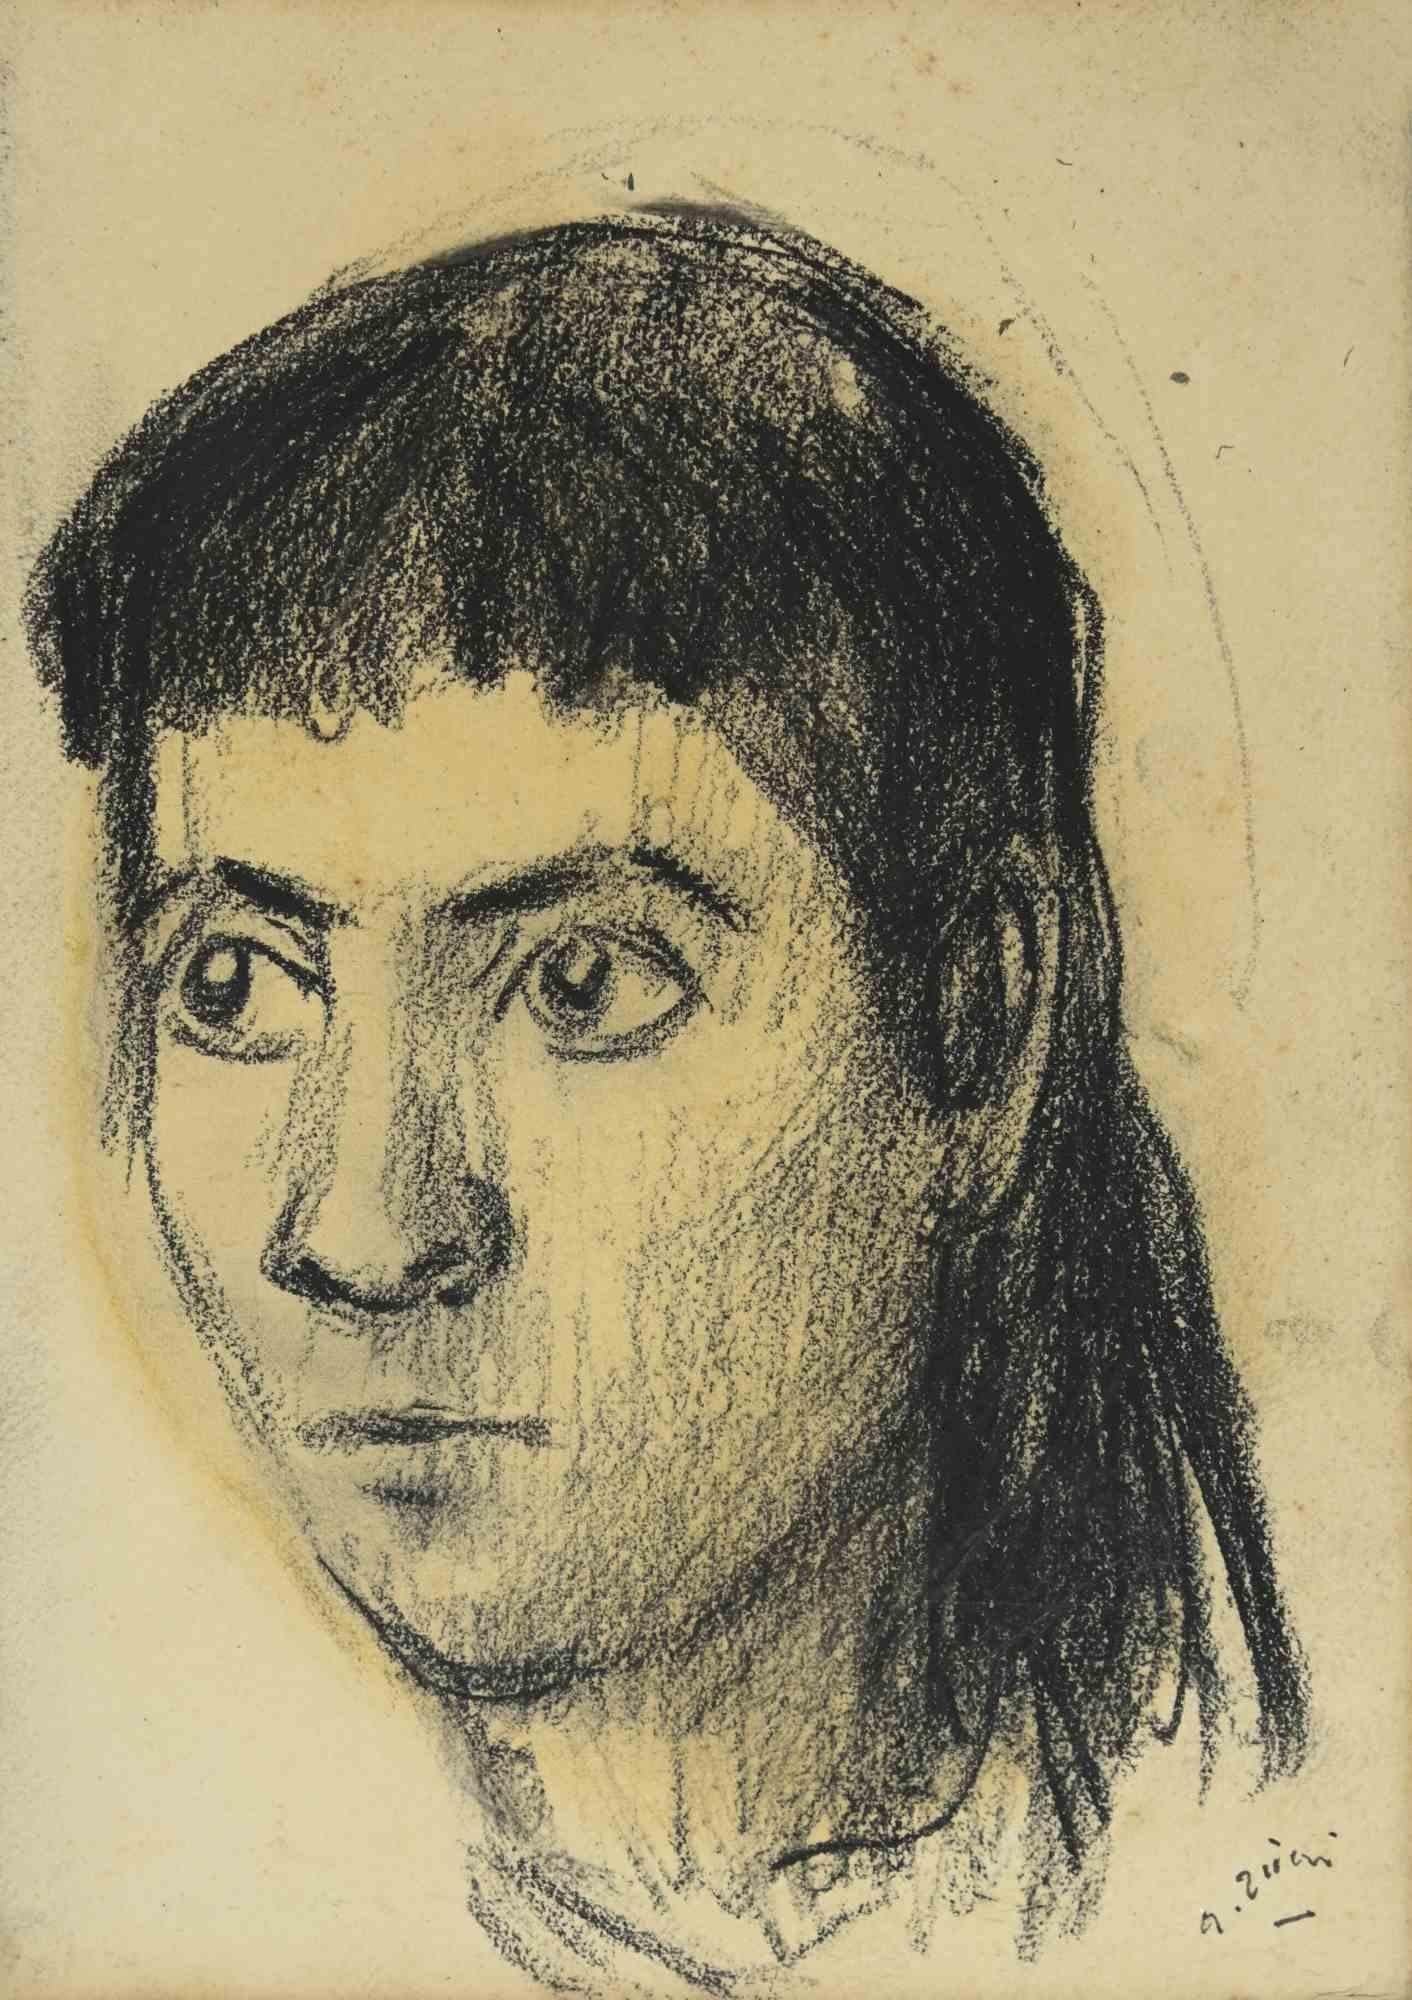 Portrait is a drawing realized by Alberto Ziveri in the 1930s.

Charcoal and Pastel on paper.

Hand-signed.

In good conditions.

The artwork is represented through deft strokes masterly.

Alberto Ziveri (Rome,1908 – 1990), the Italian painter of